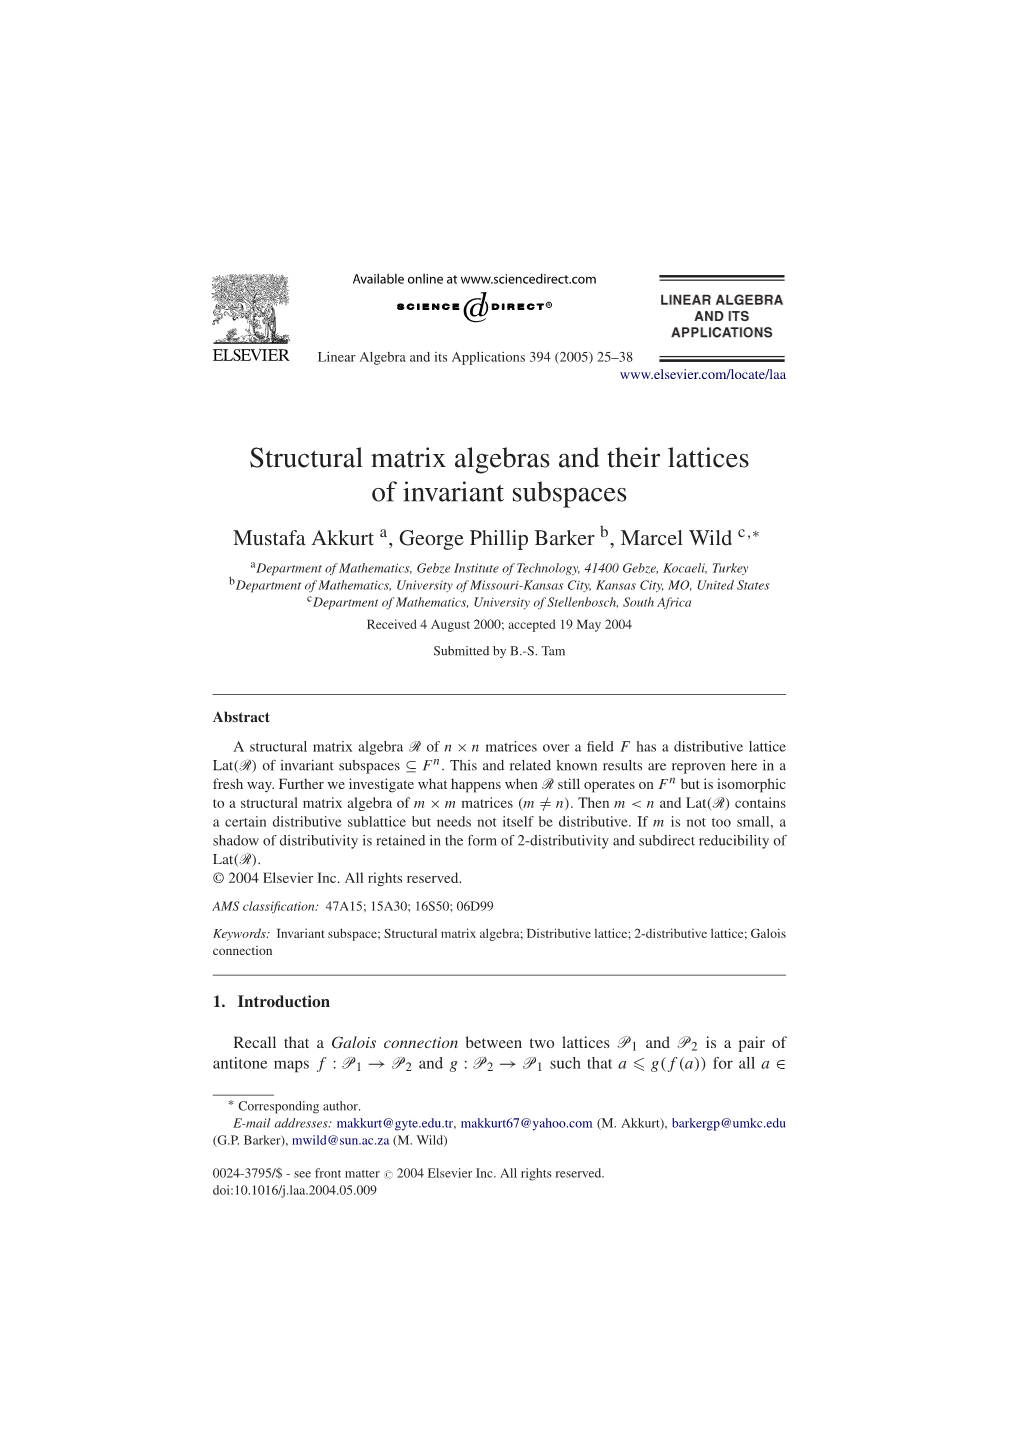 Structural Matrix Algebras and Their Lattices of Invariant Subspaces